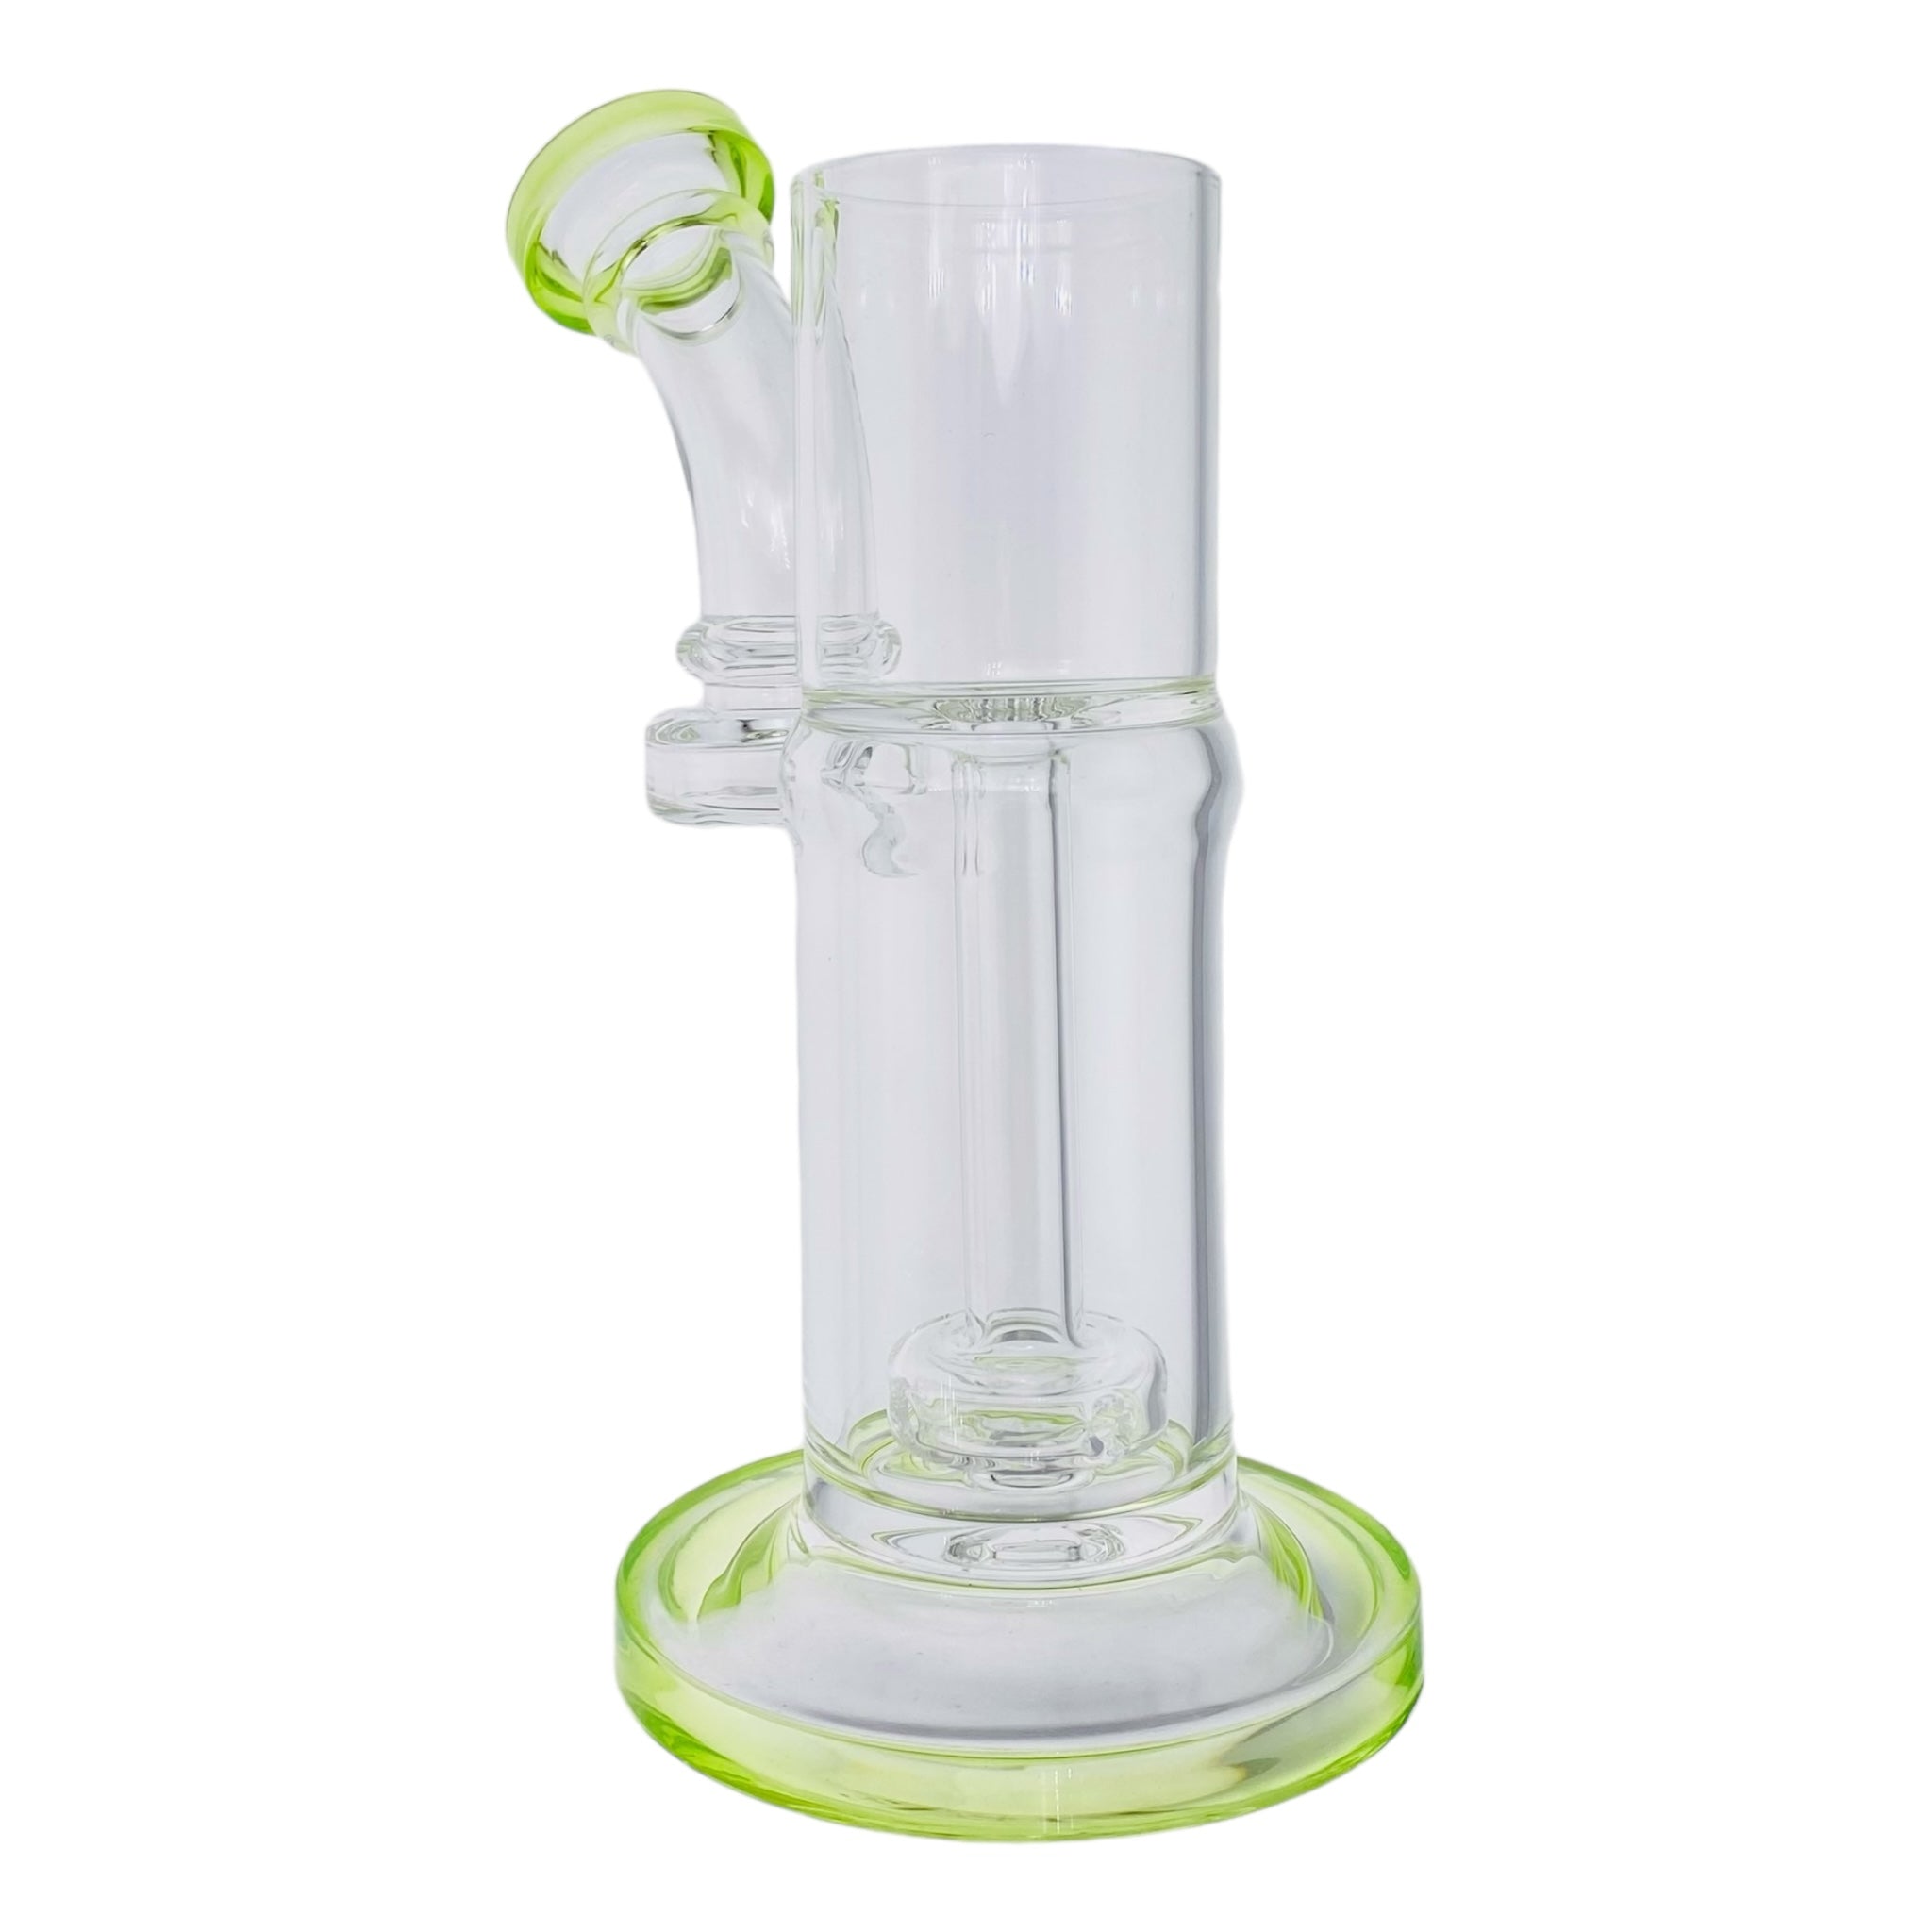 puffco proxy glass bong with green accents for sale